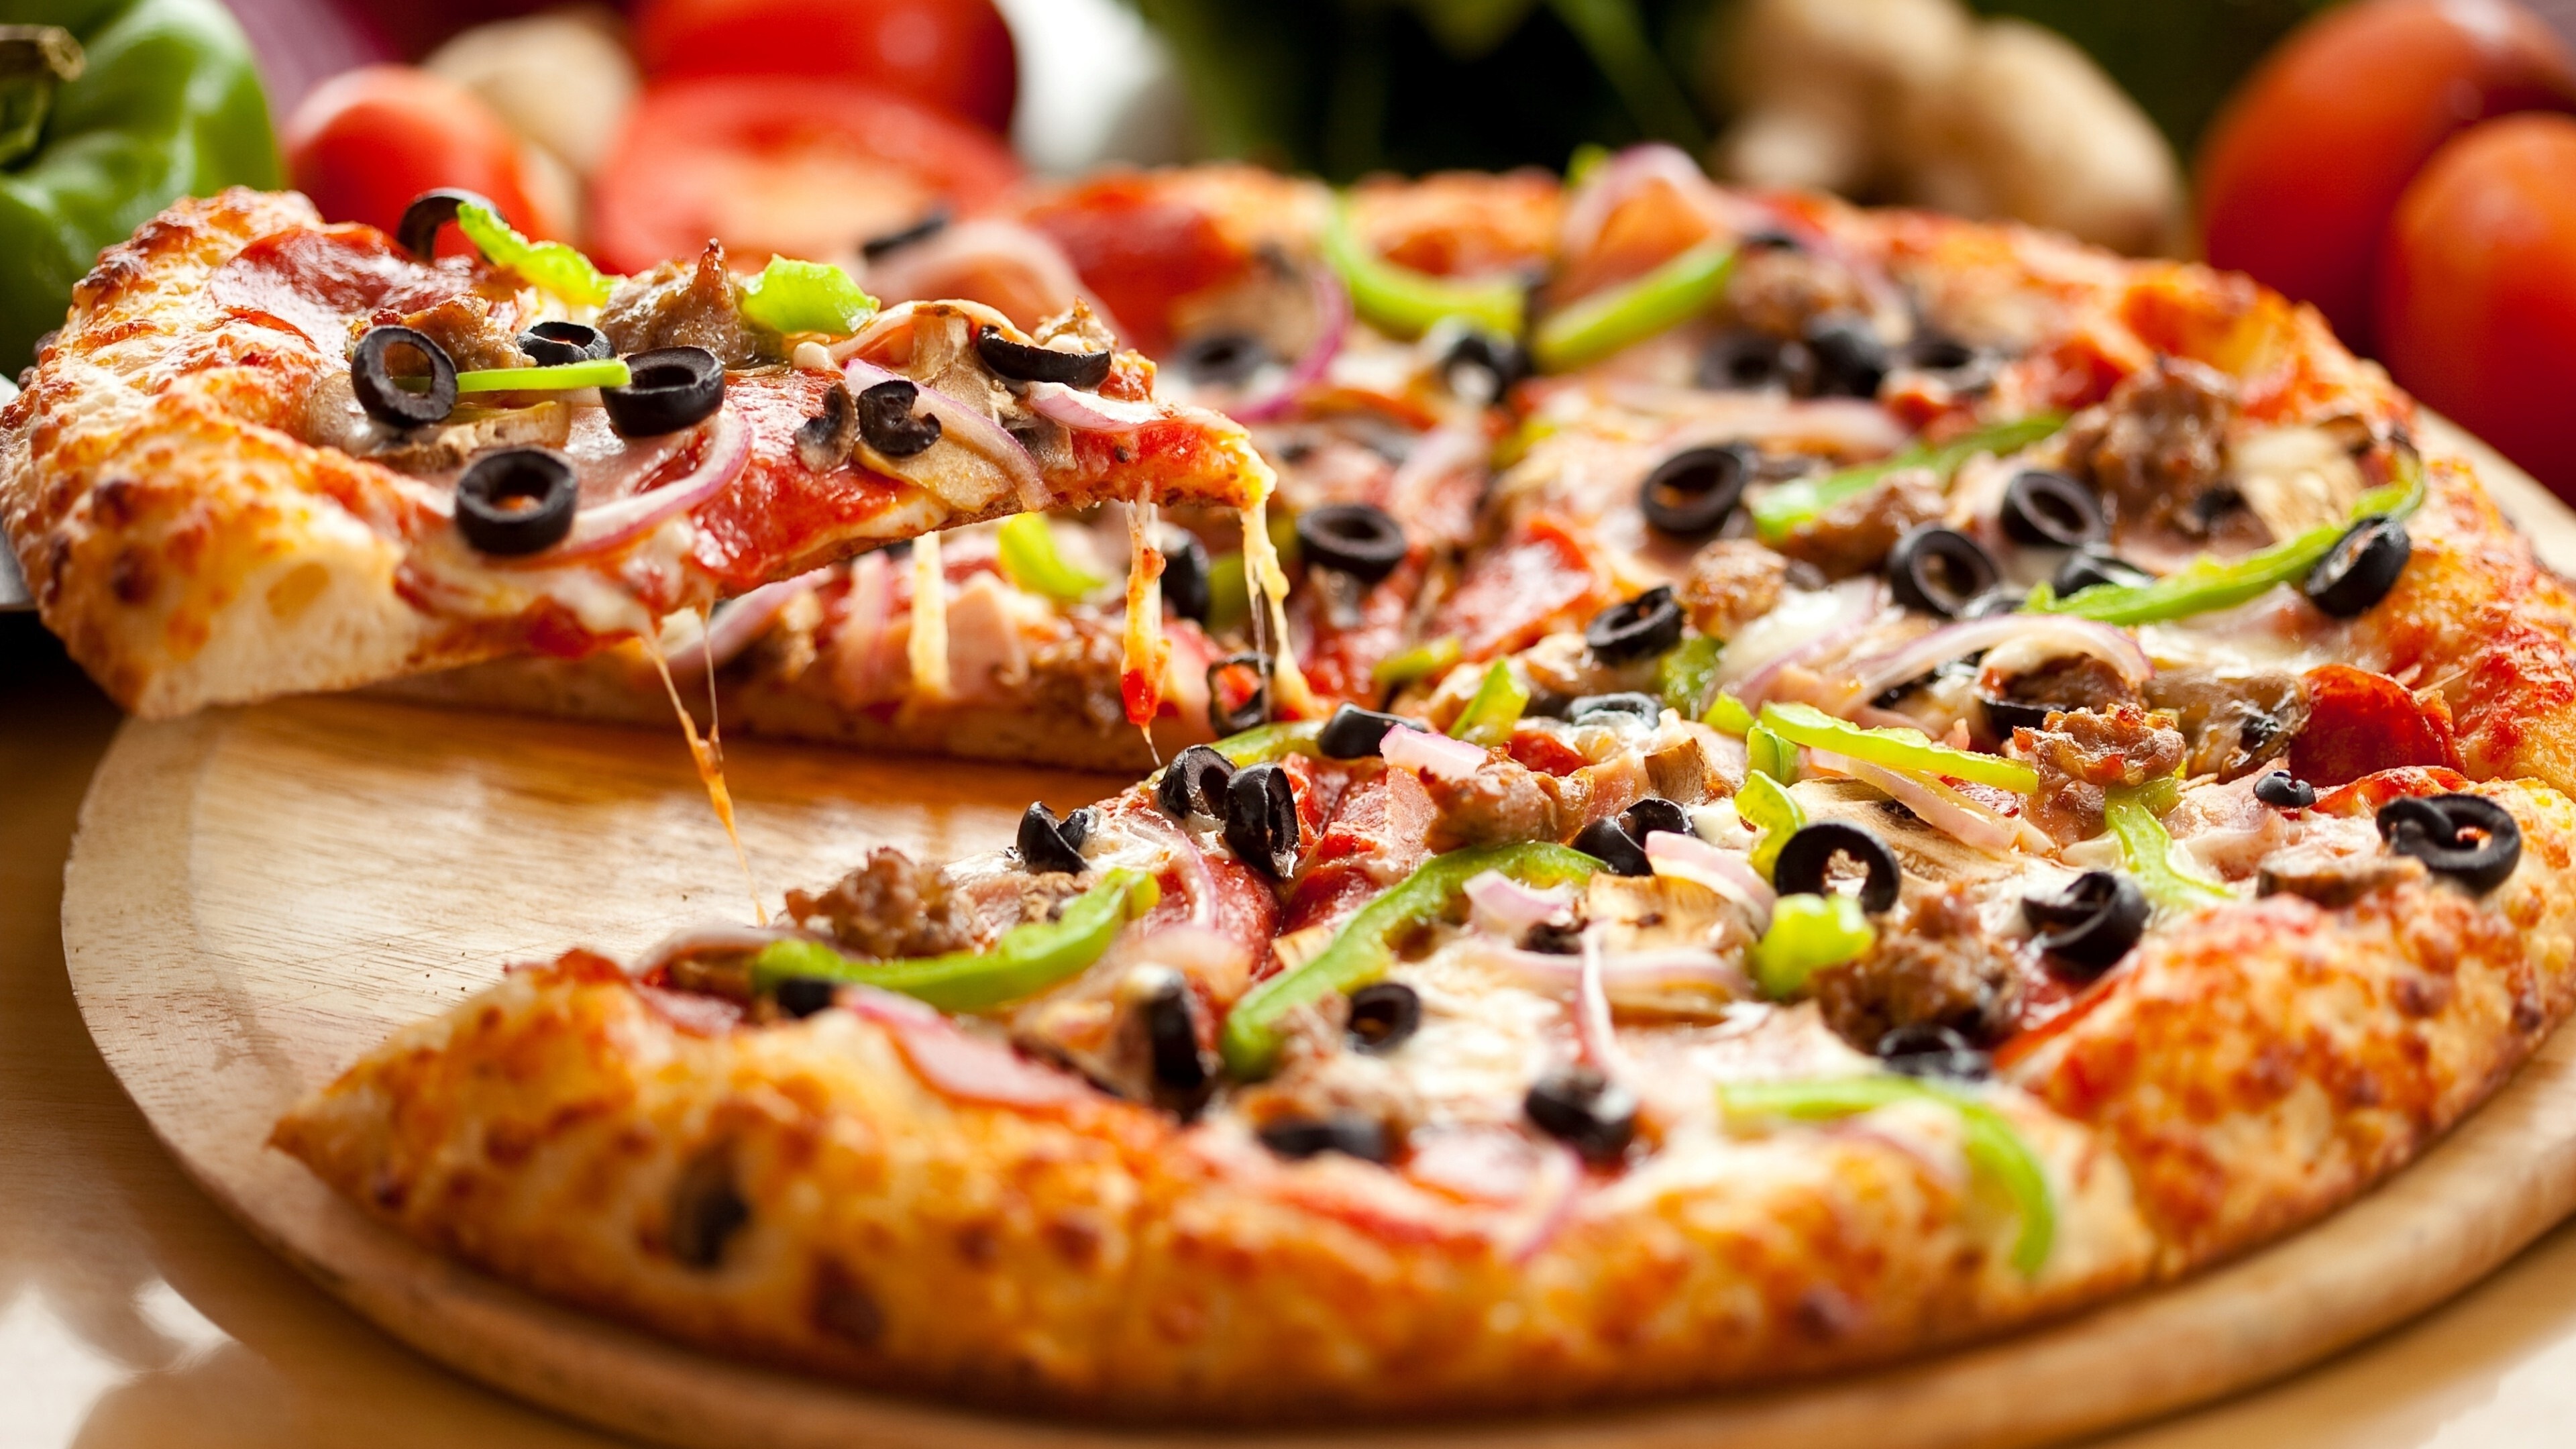 Pizza: A shallow breadlike crust covered with toppings, Cheese, Vegetables, Olives. 3840x2160 4K Wallpaper.